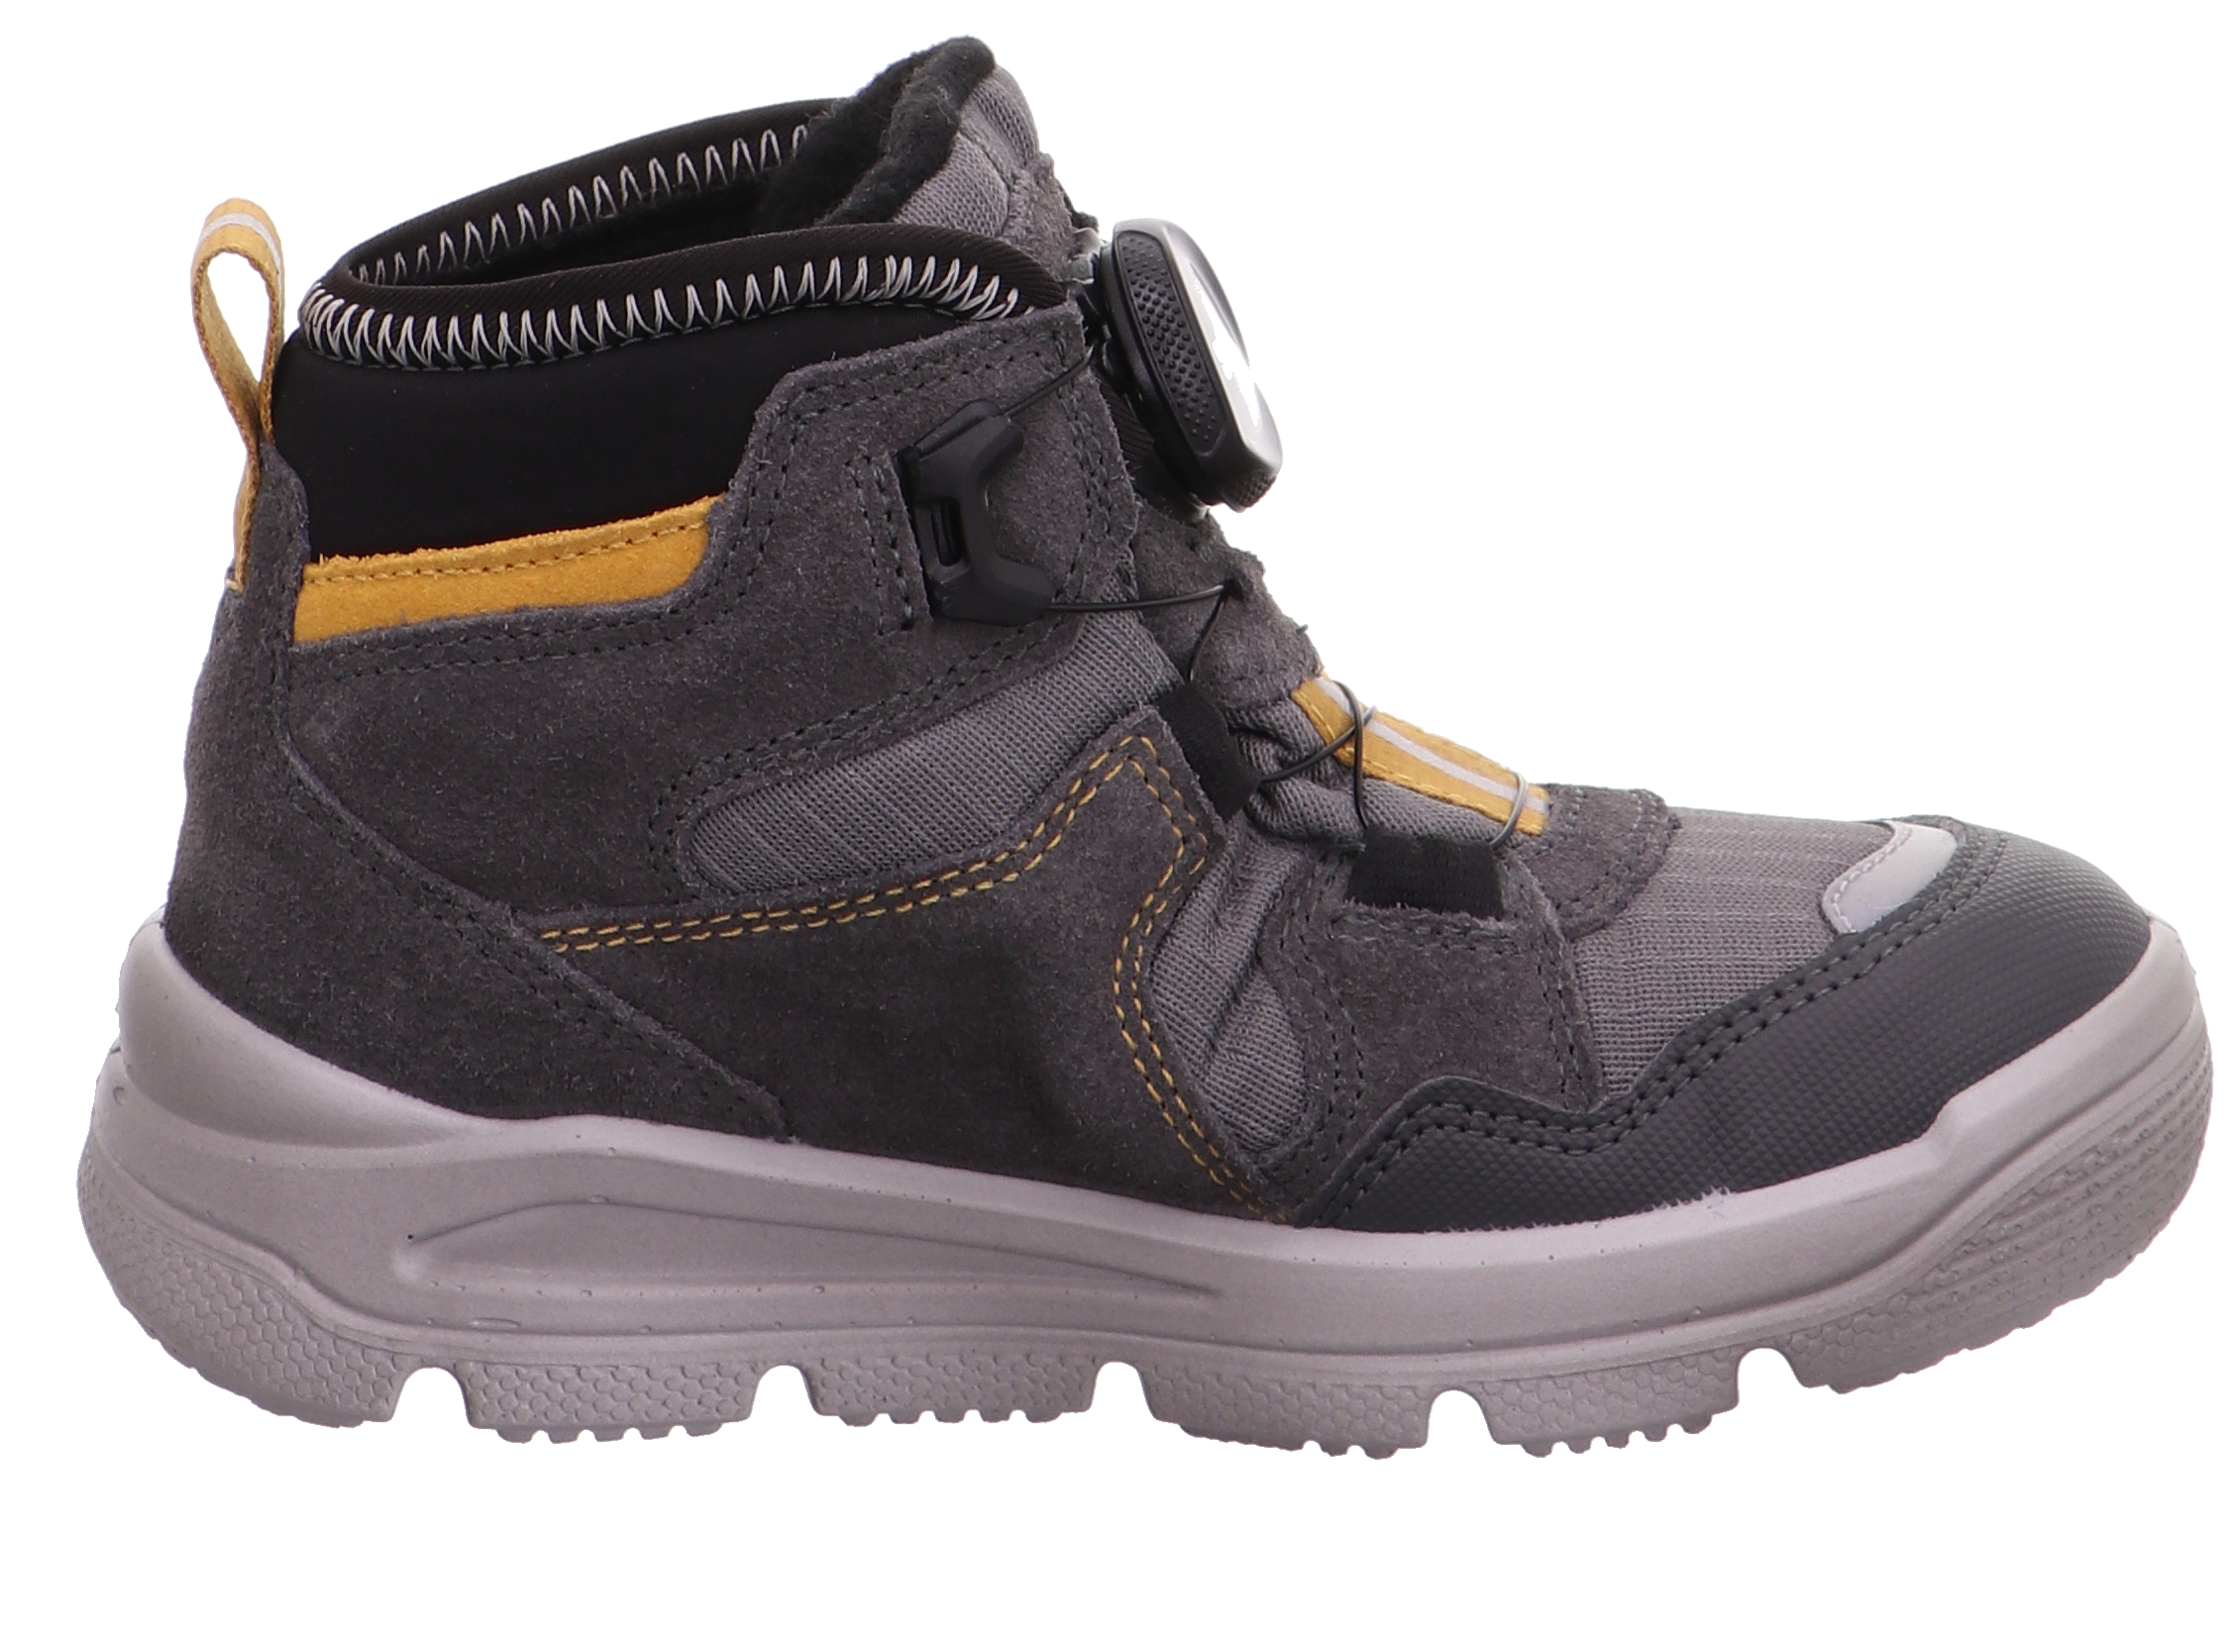 Superfit Mars - Grey / Yellow Suede Leather/Textile